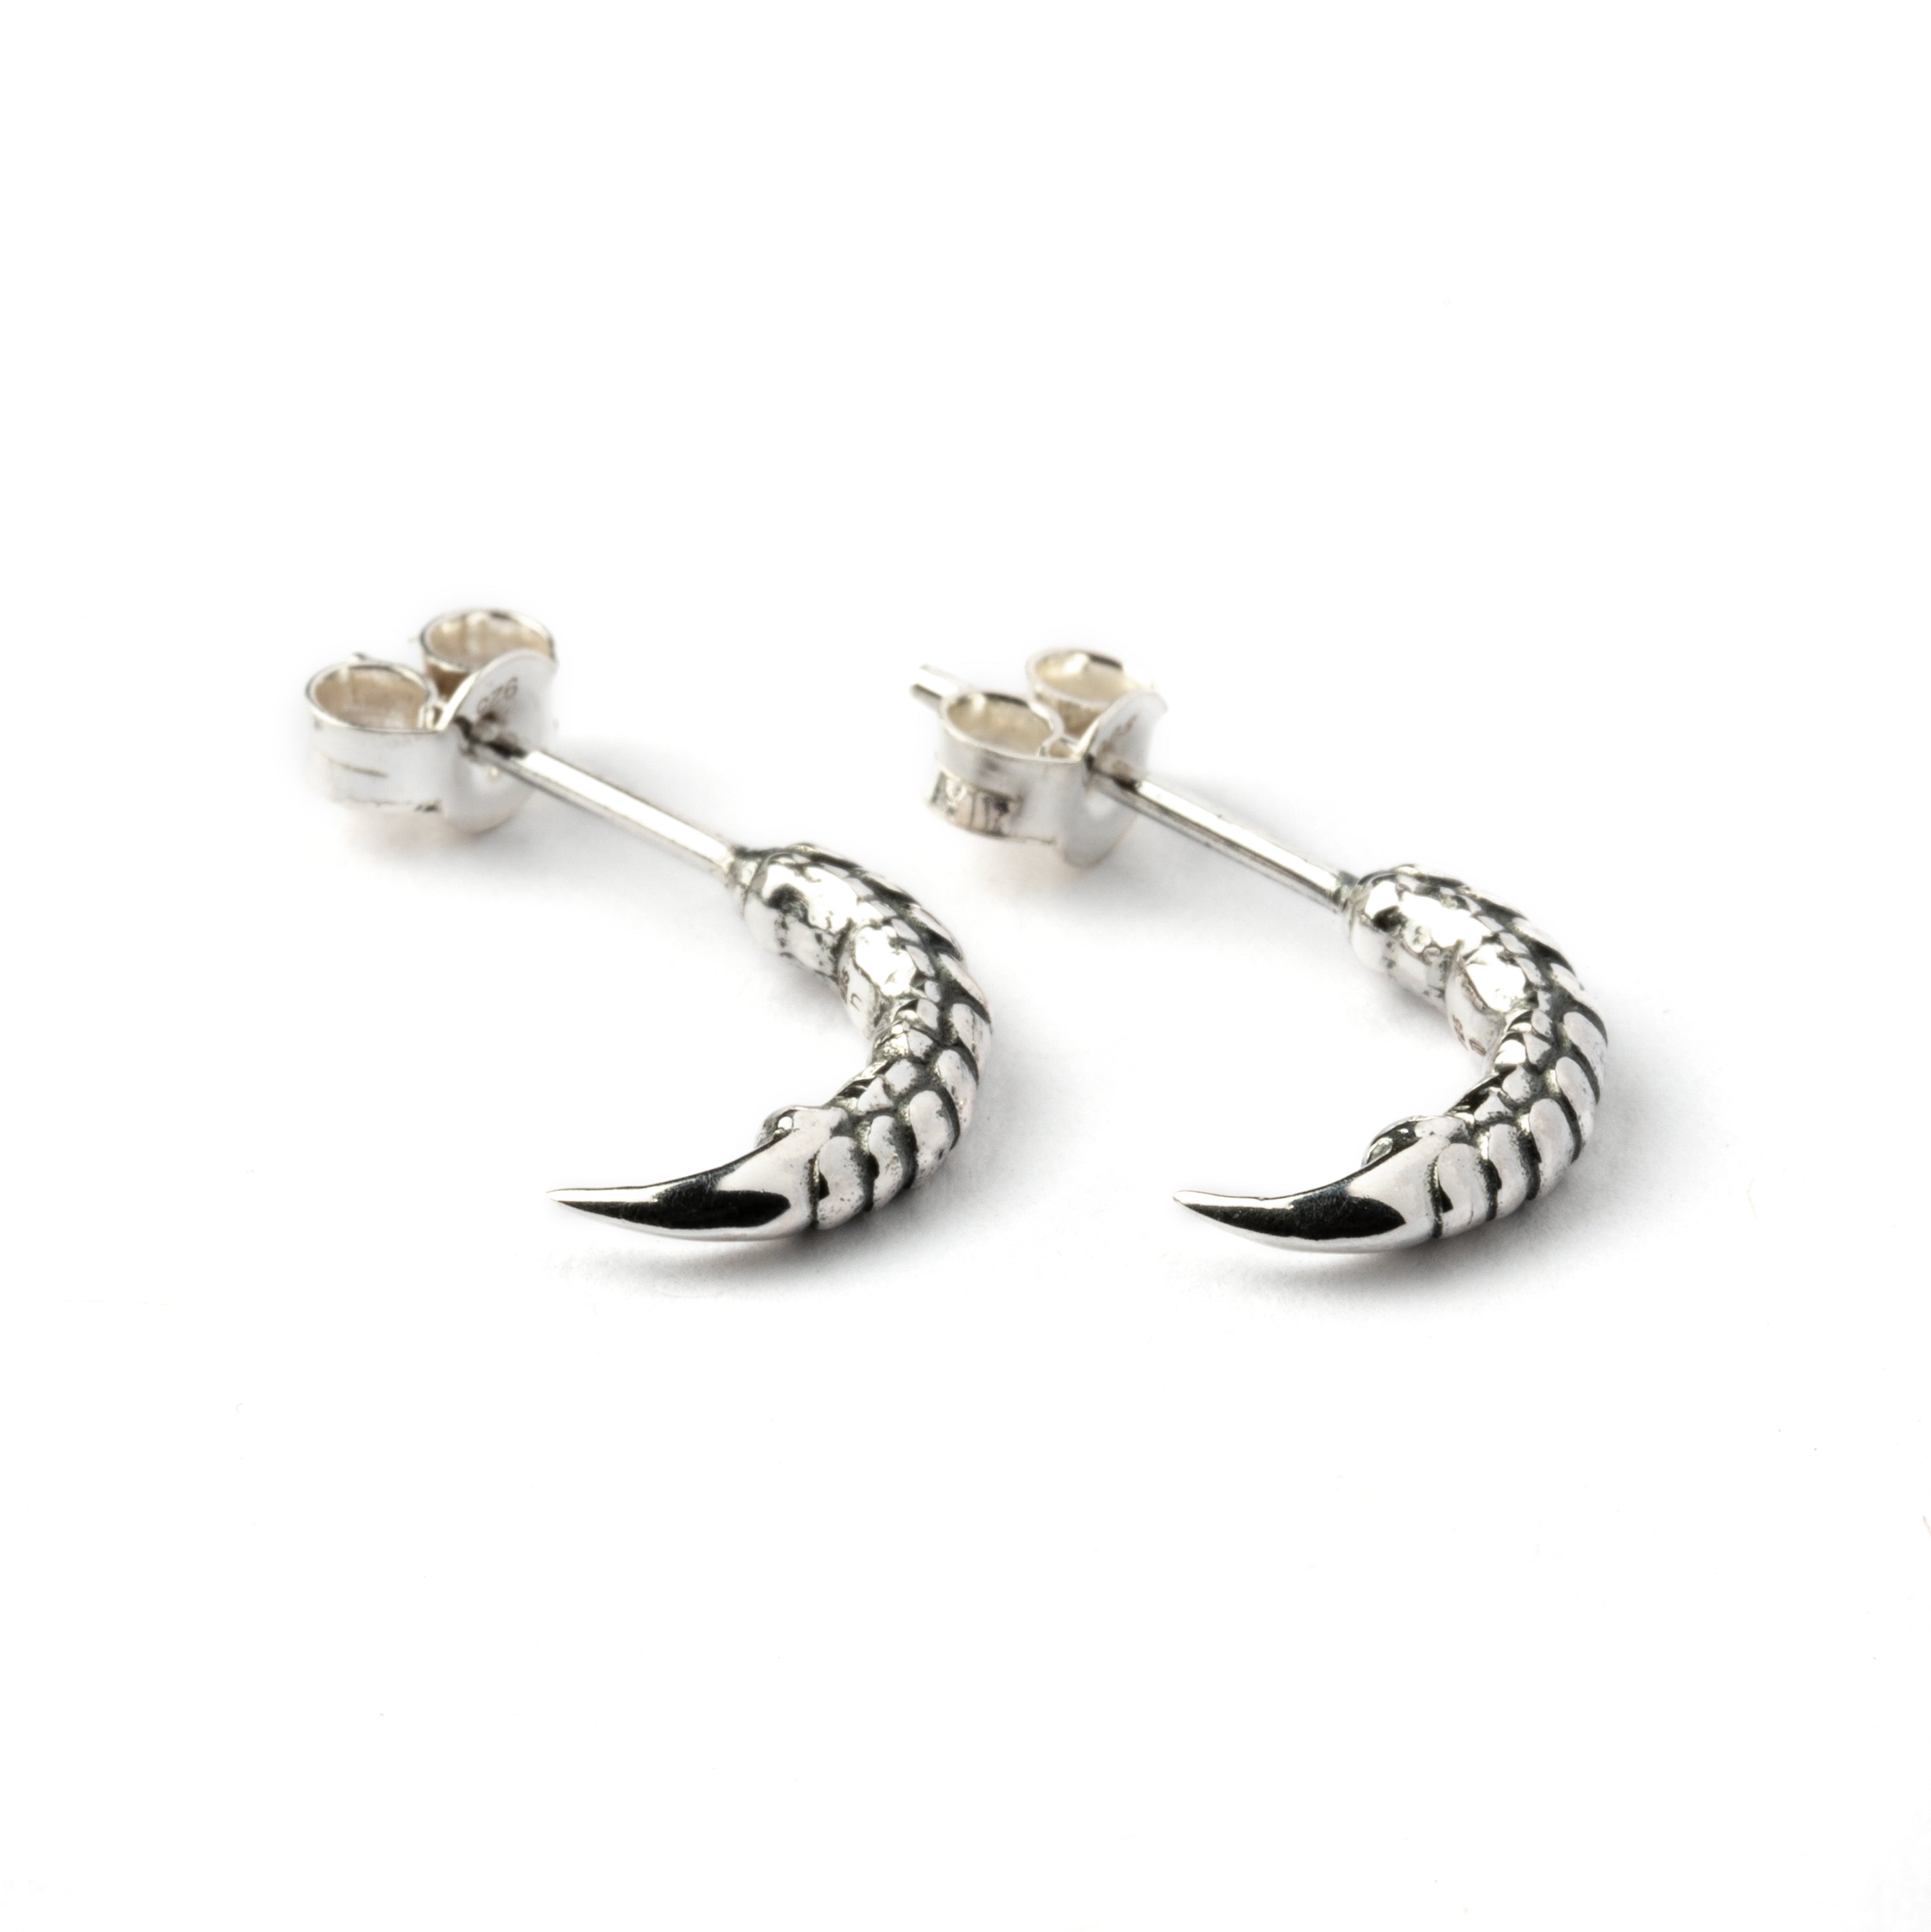 Silver Talon Earrings side and front view